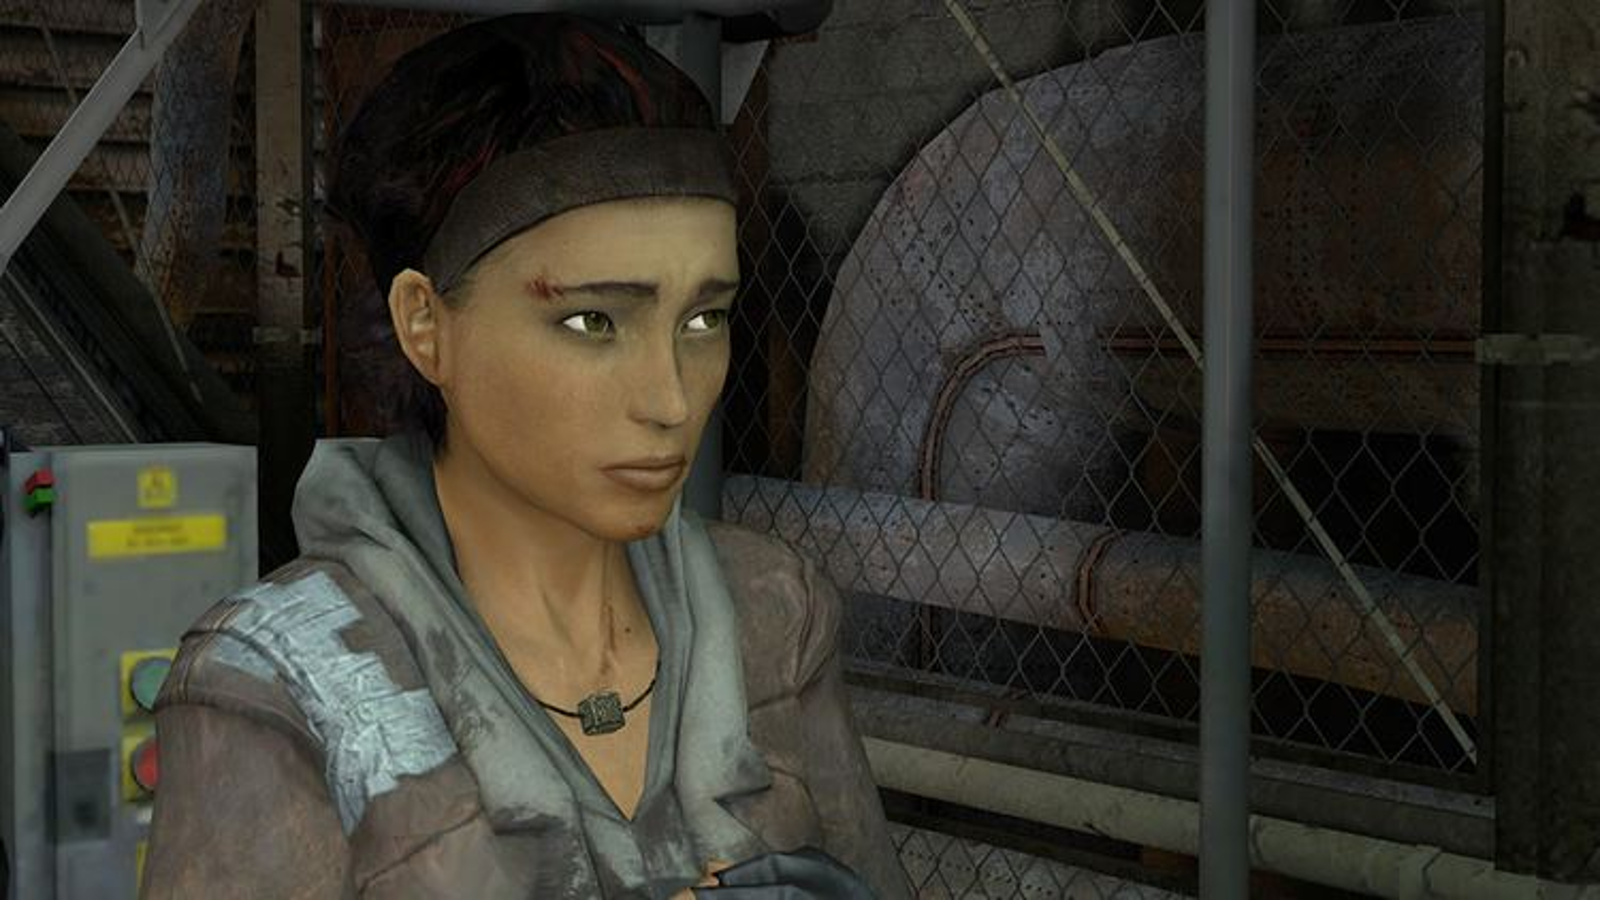 Half-Life: Alyx' Now Includes 3 Hours of In-game Developer Commentary